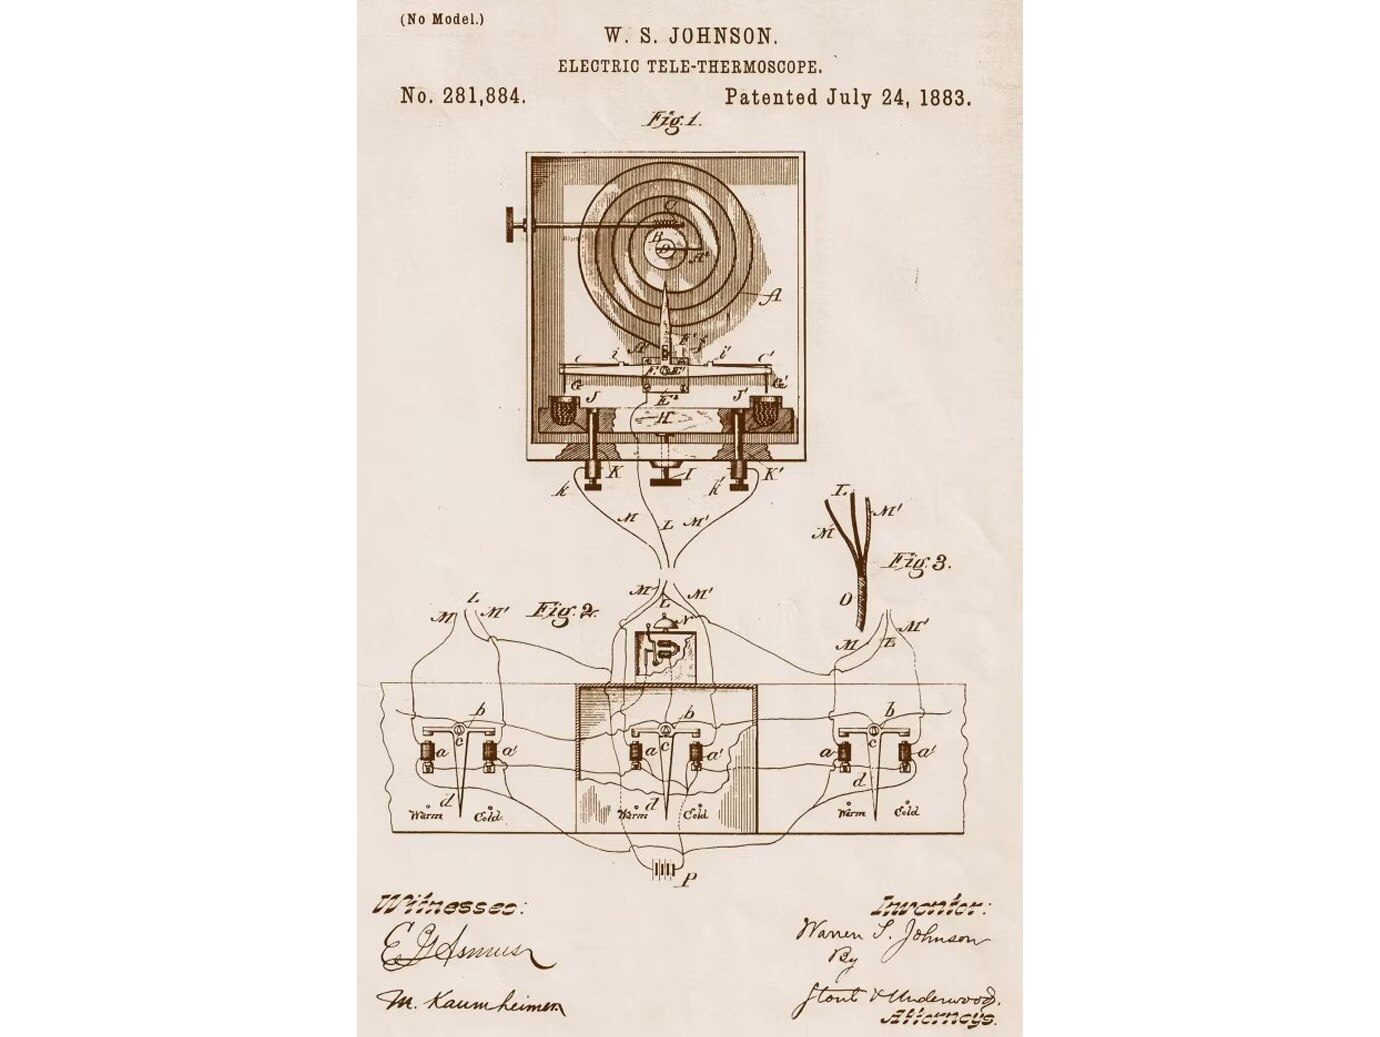 The electric tele-thermoscope patent document